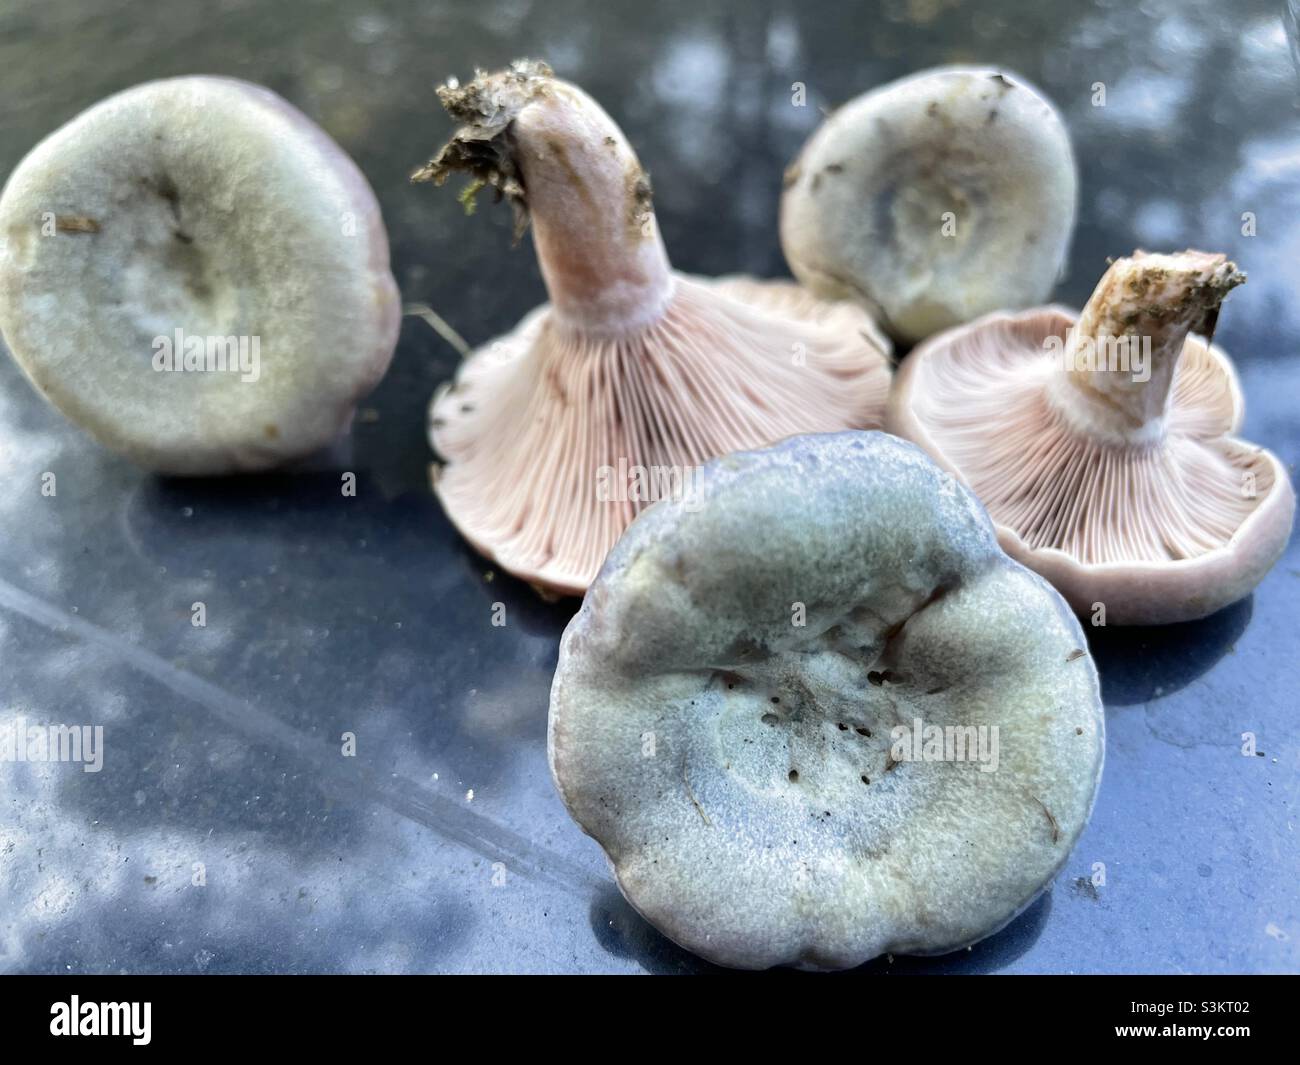 Wood blewit, or clytocybe nuda, found in southeastern U.S., in October. Can be found in coniferous or deciduous woods. Stock Photo